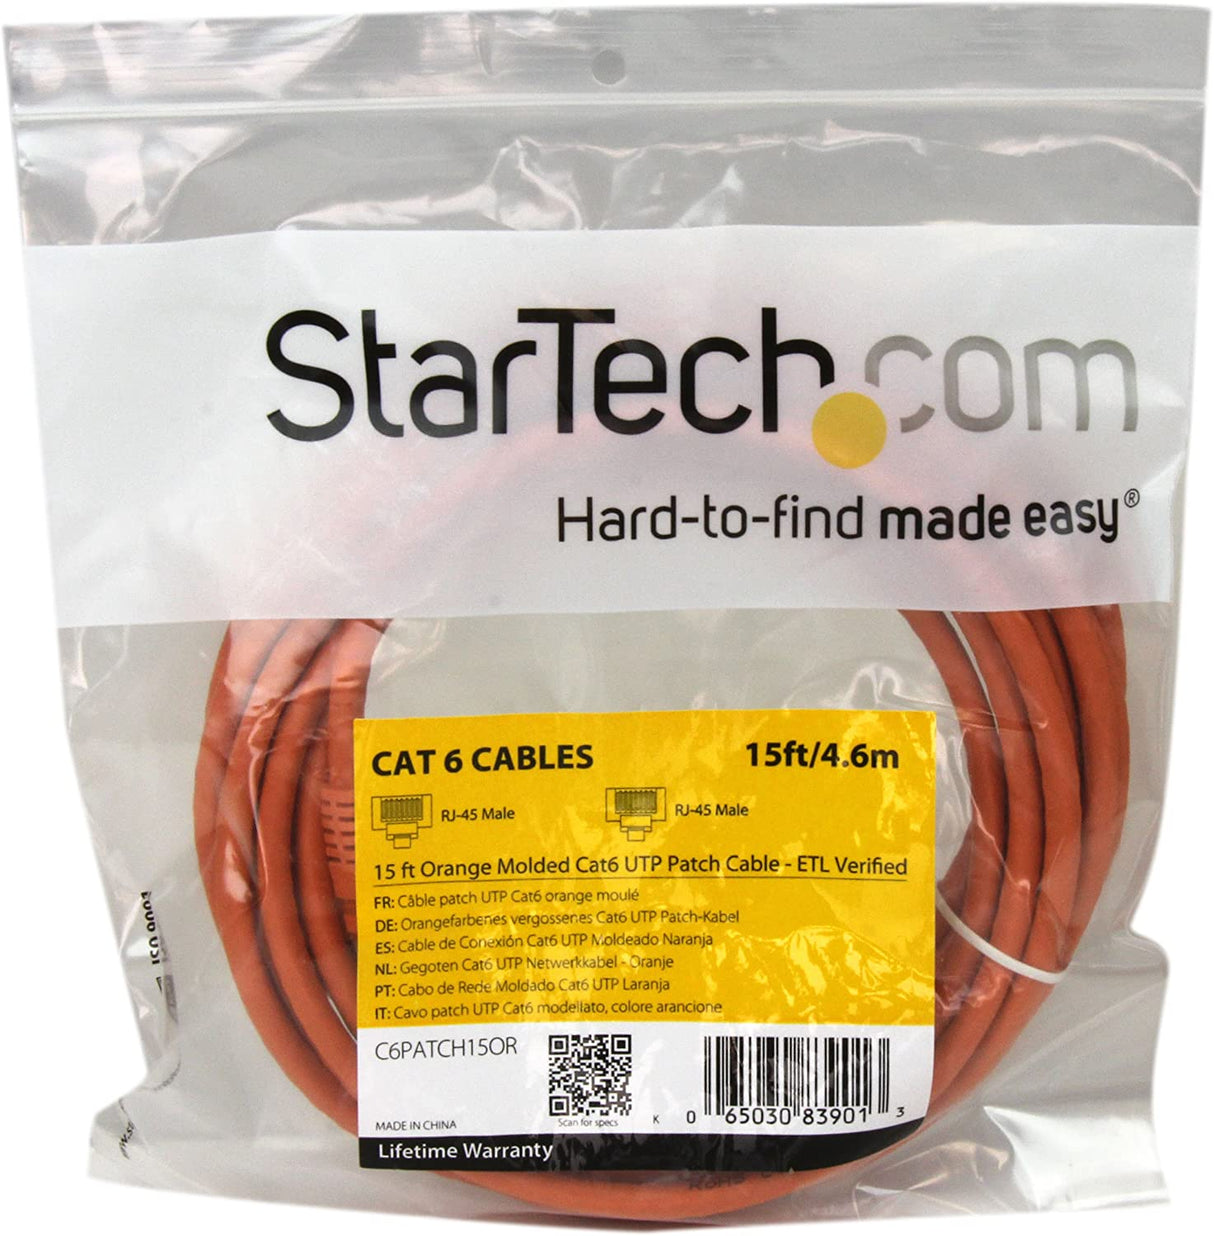 StarTech.com 15ft CAT6 Ethernet Cable - Orange CAT 6 Gigabit Ethernet Wire -650MHz 100W PoE++ RJ45 UTP Molded Category 6 Network/Patch Cord w/Strain Relief/Fluke Tested UL/TIA Certified (C6PATCH15OR) Orange 15 ft / 4.5 m 1 Pack